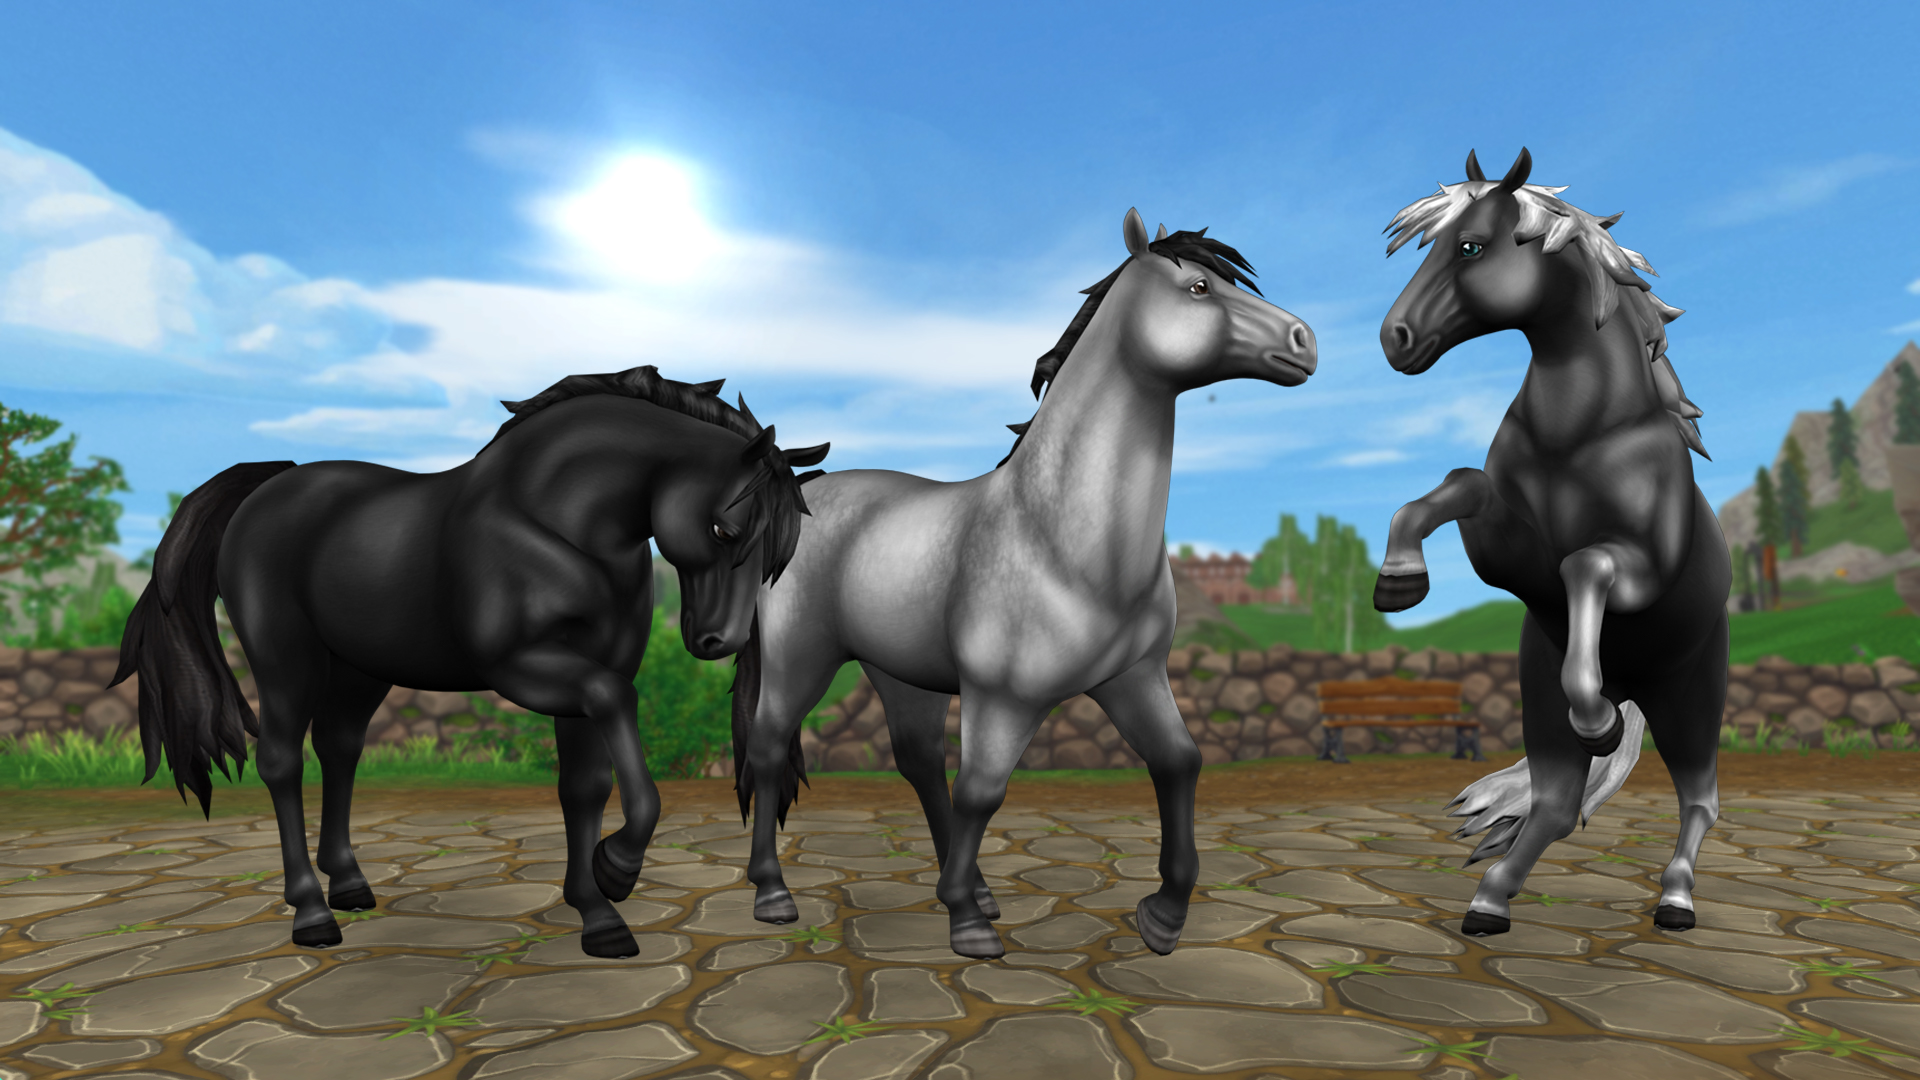 When in their normal form, the horses look like this…